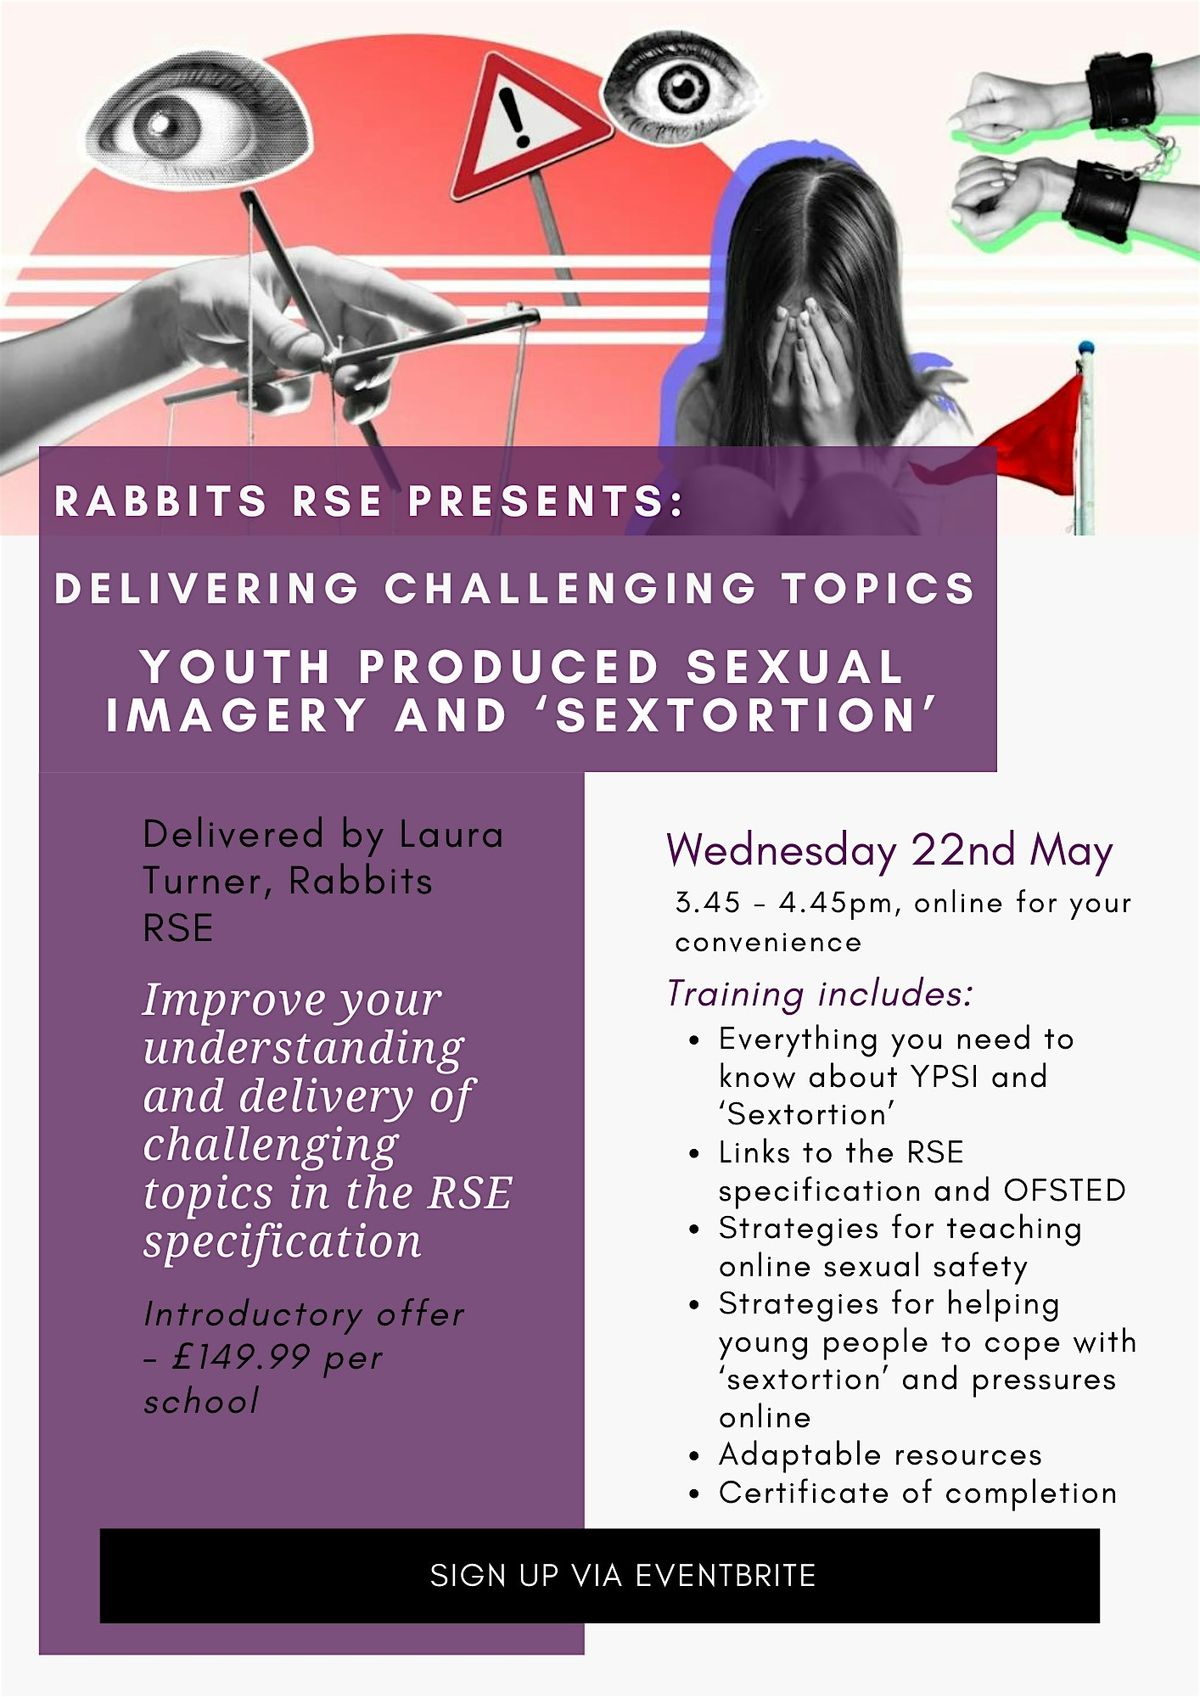 Rabbits RSE Presents: Delivering difficult topics - YPSI and 'Sextortion'